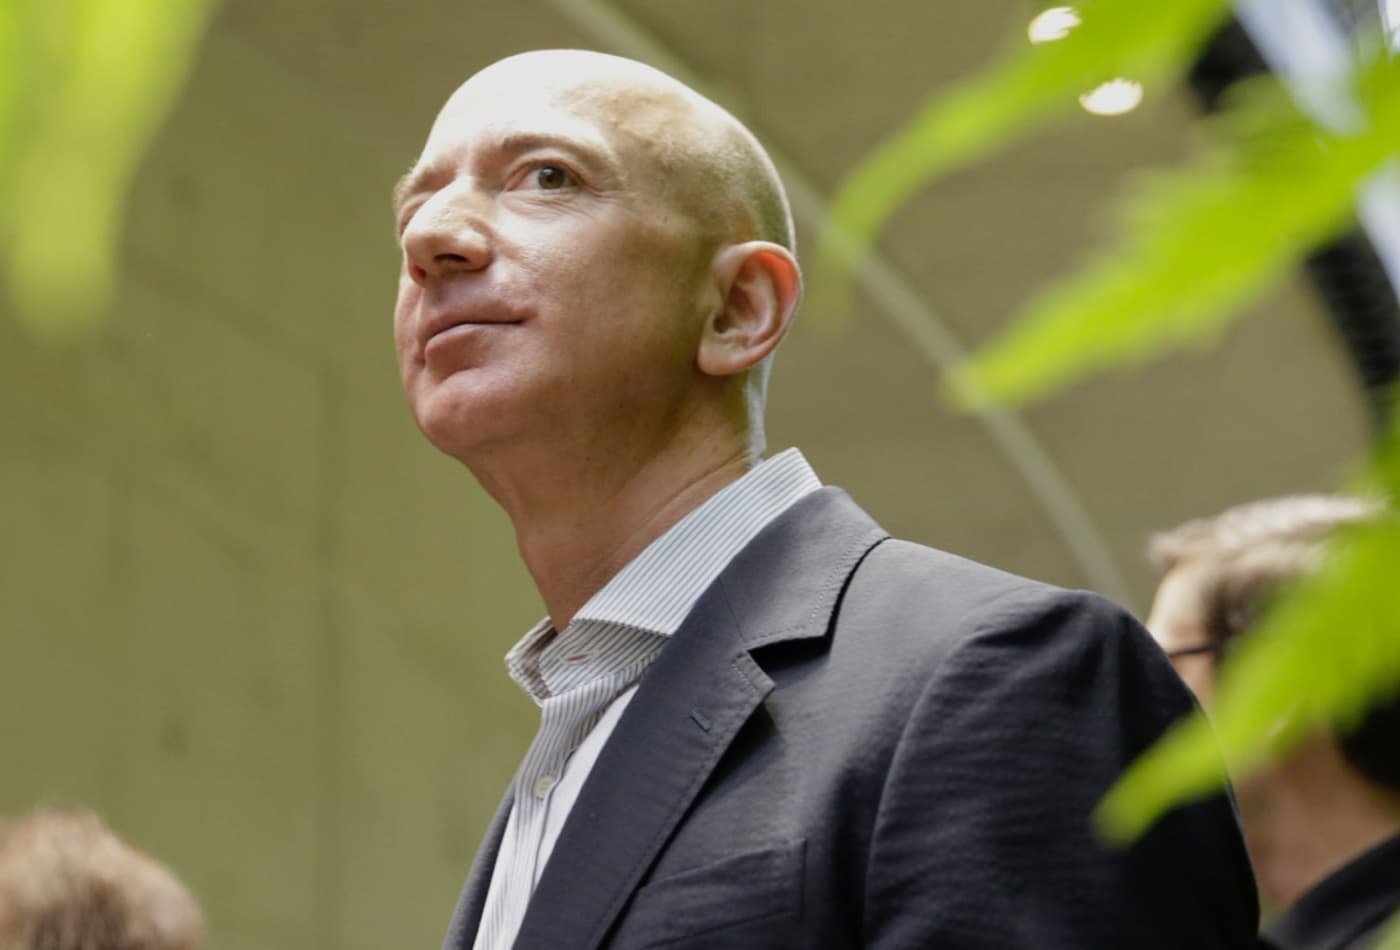 Tech 2021: A Changing of the Guard at Amazon